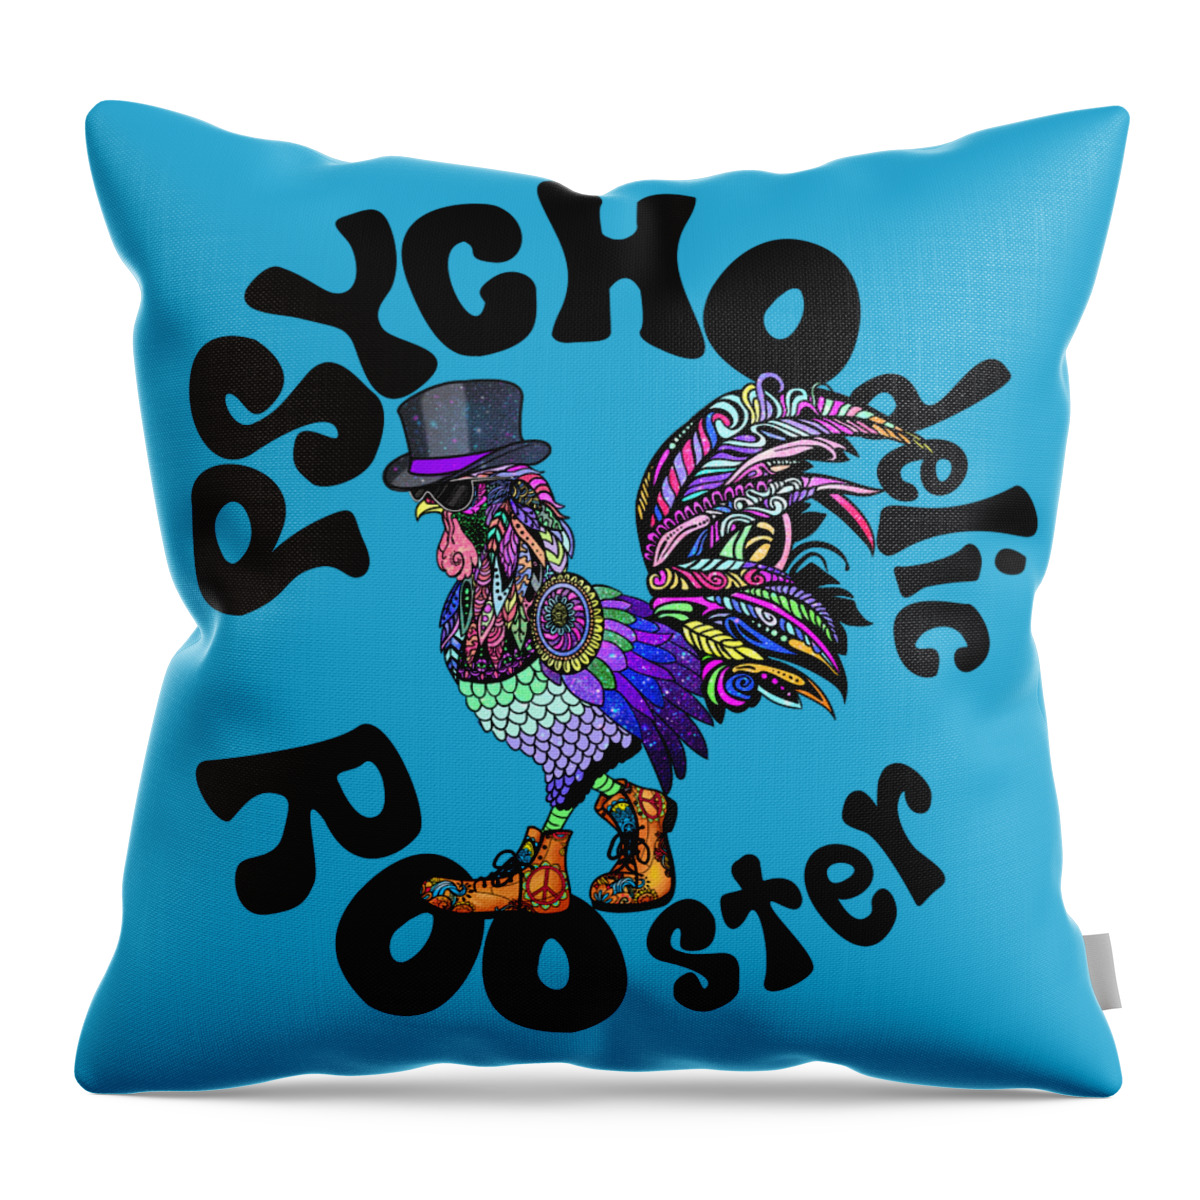  Throw Pillow featuring the digital art PSYCHOdelic ROOster Aqua Print by Tony Camm